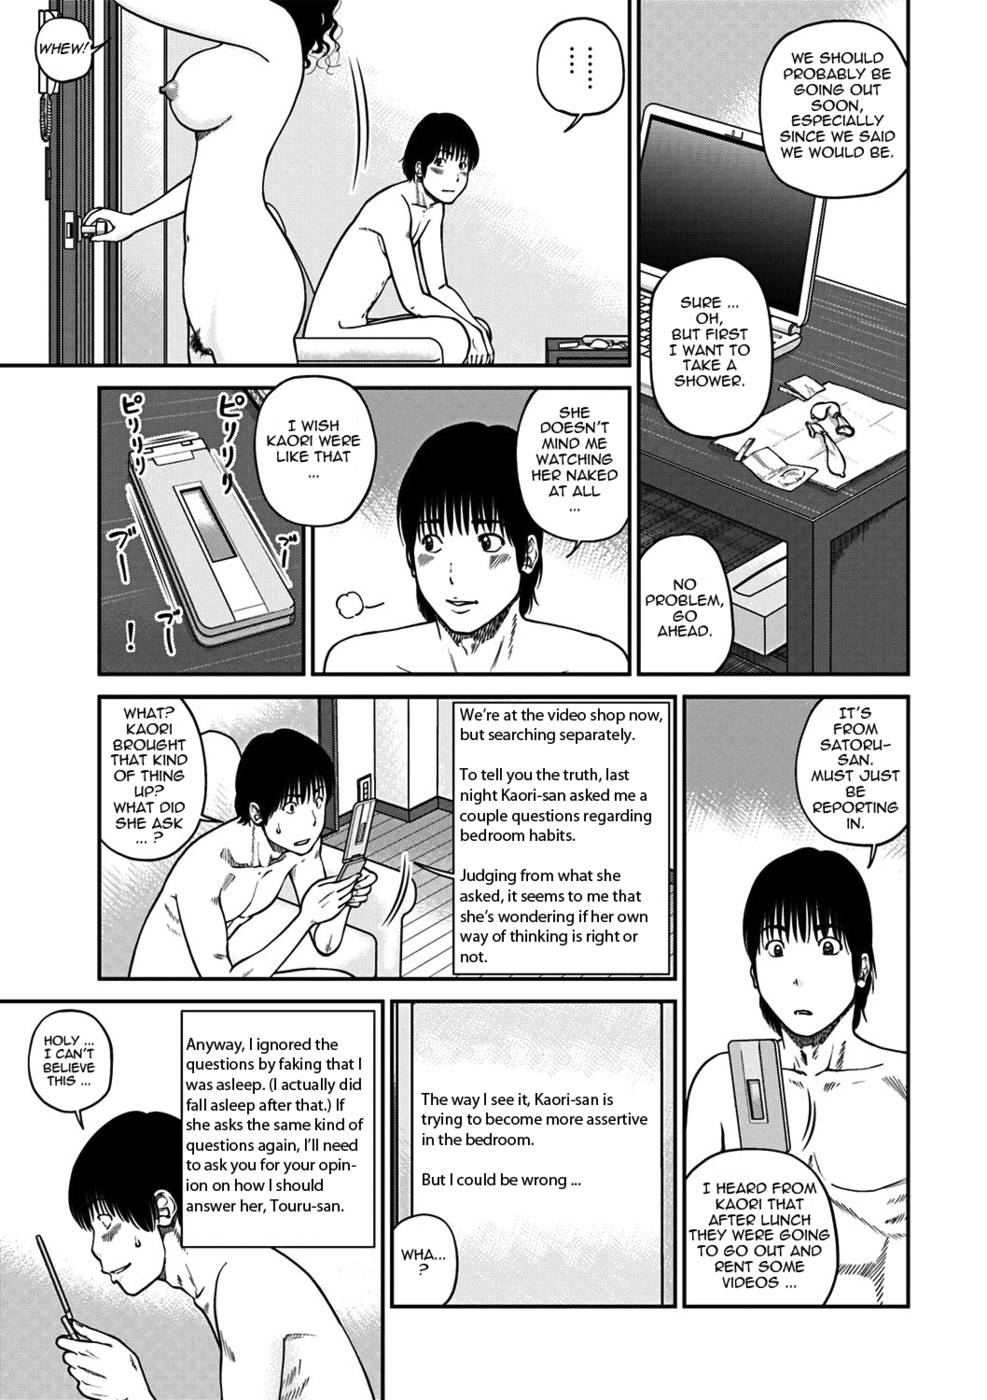 Hentai Manga Comic-33 Year Old Unsatisfied Wife-Chapter 3-Spouse Swapping-Second Day-7